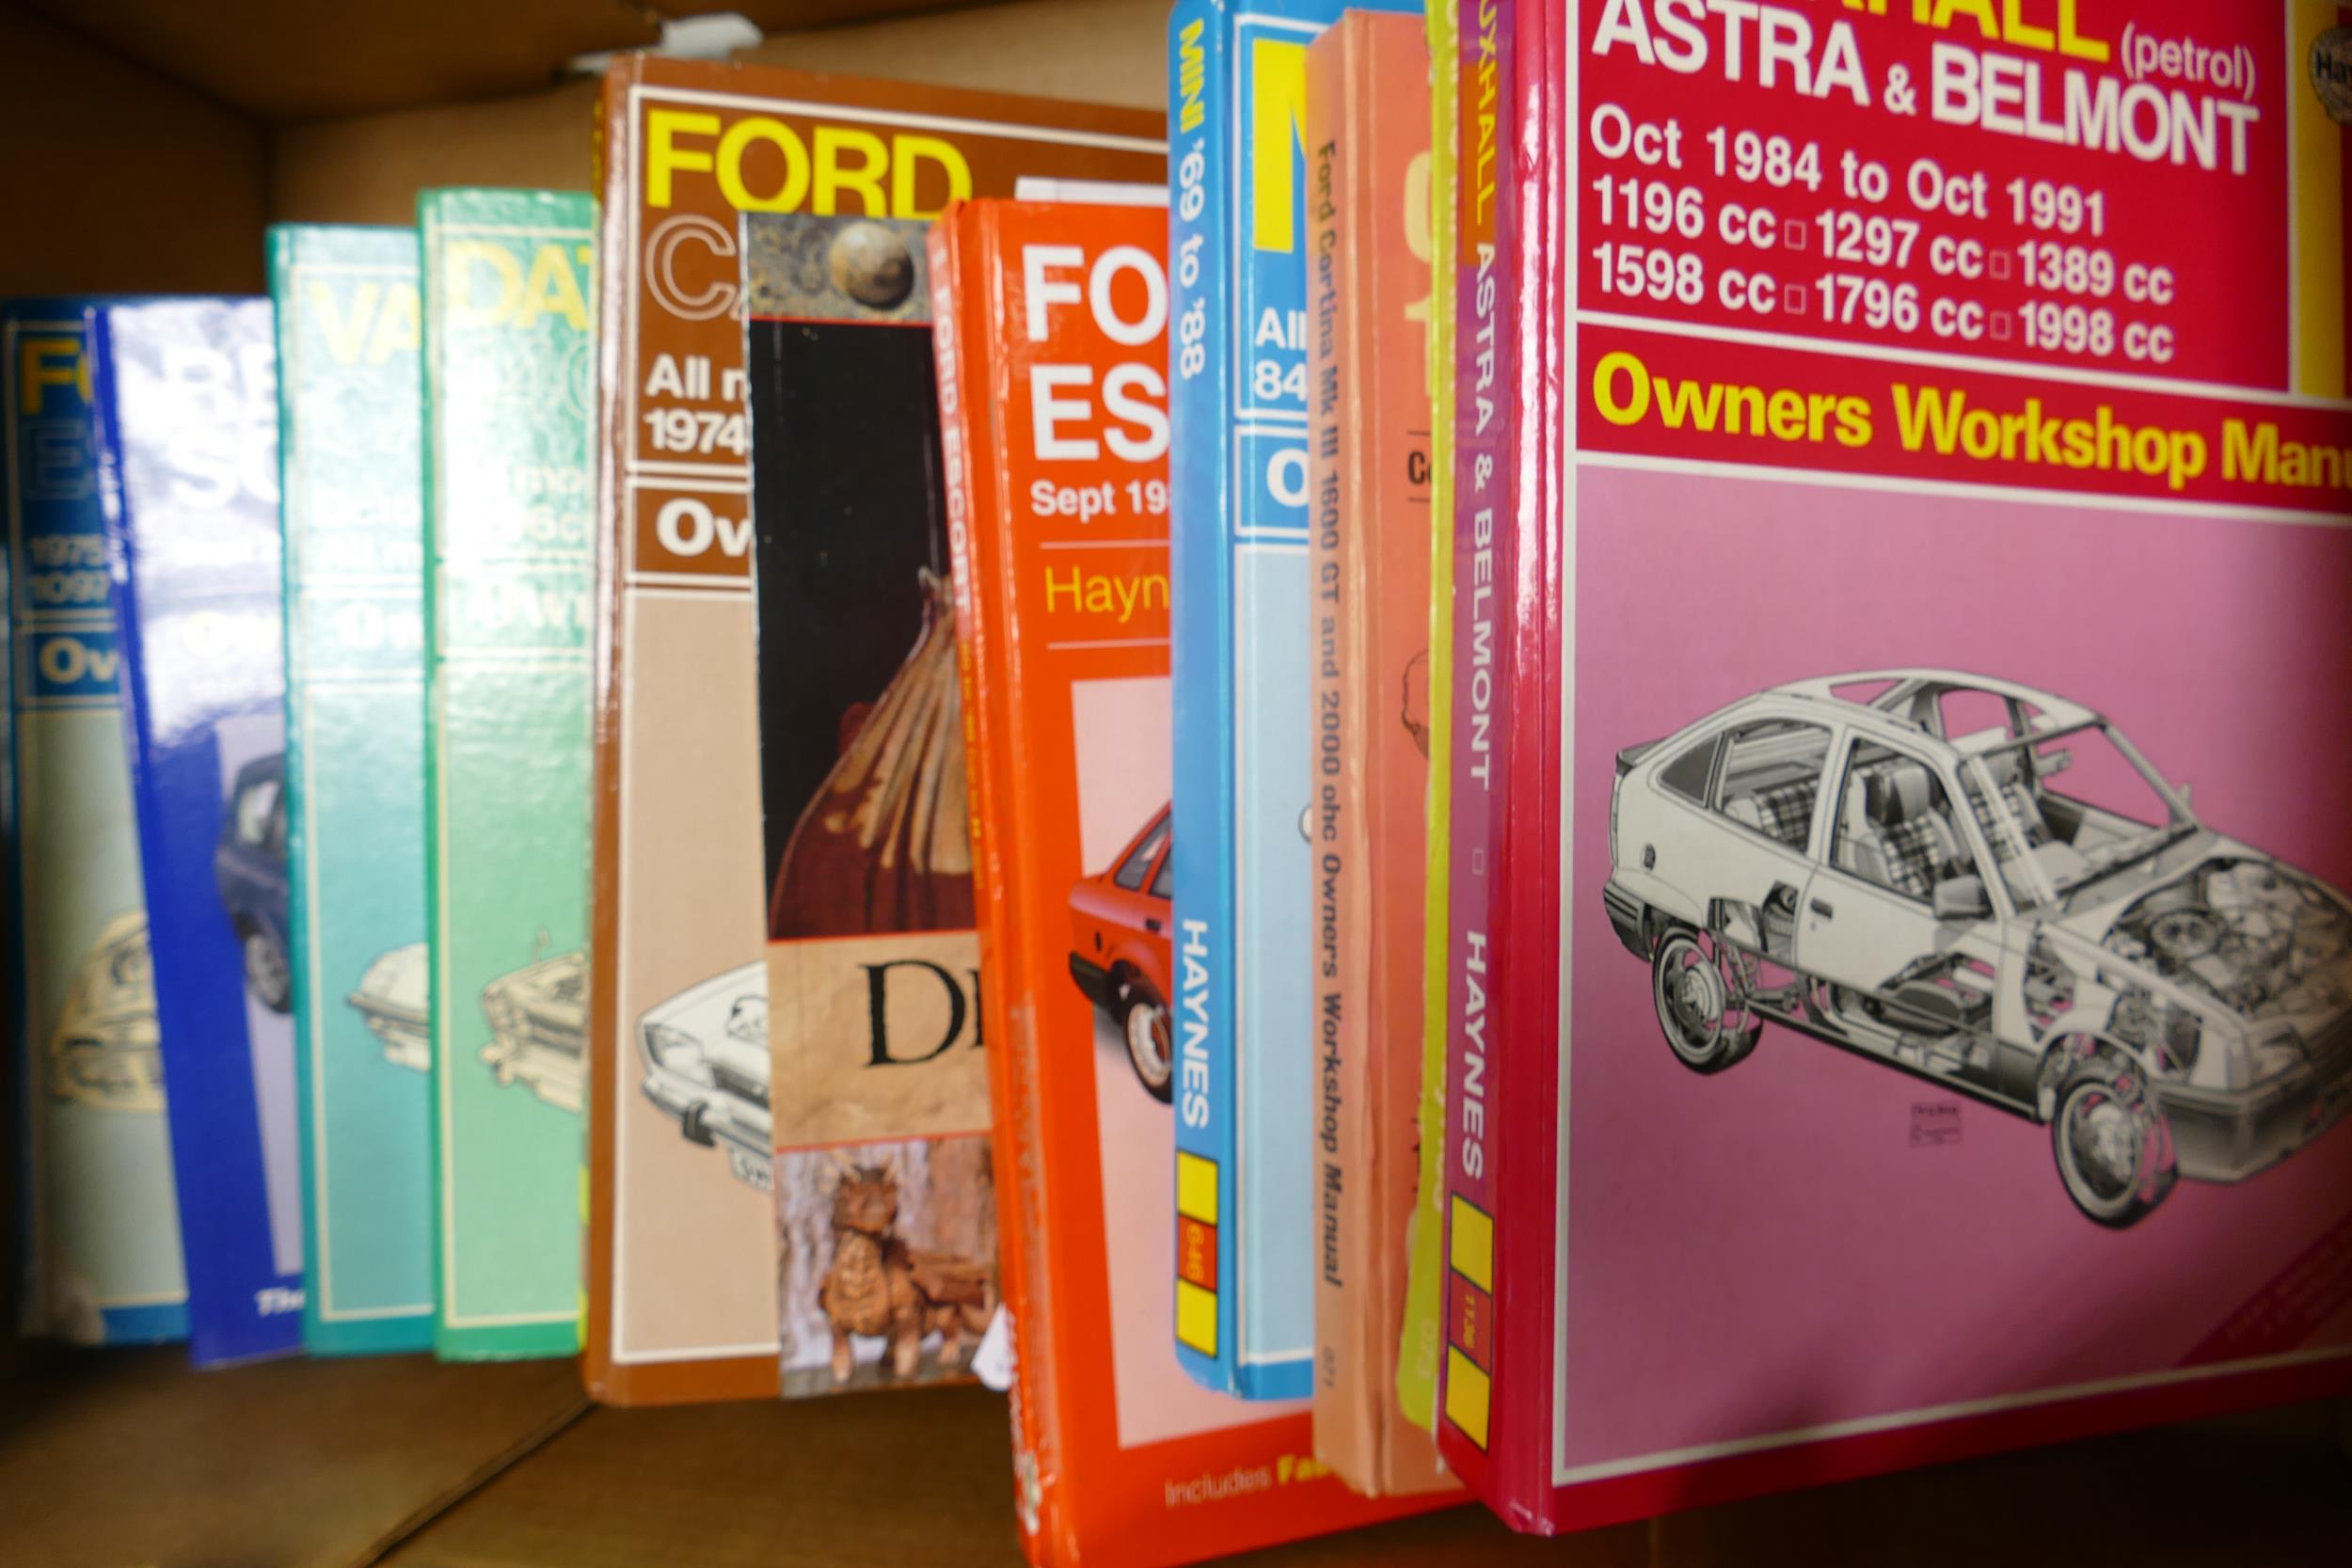 A collection of Haynes Motor Manuals including Ford Cortina GT, Ford Escort, Mini, Ford Capri etc